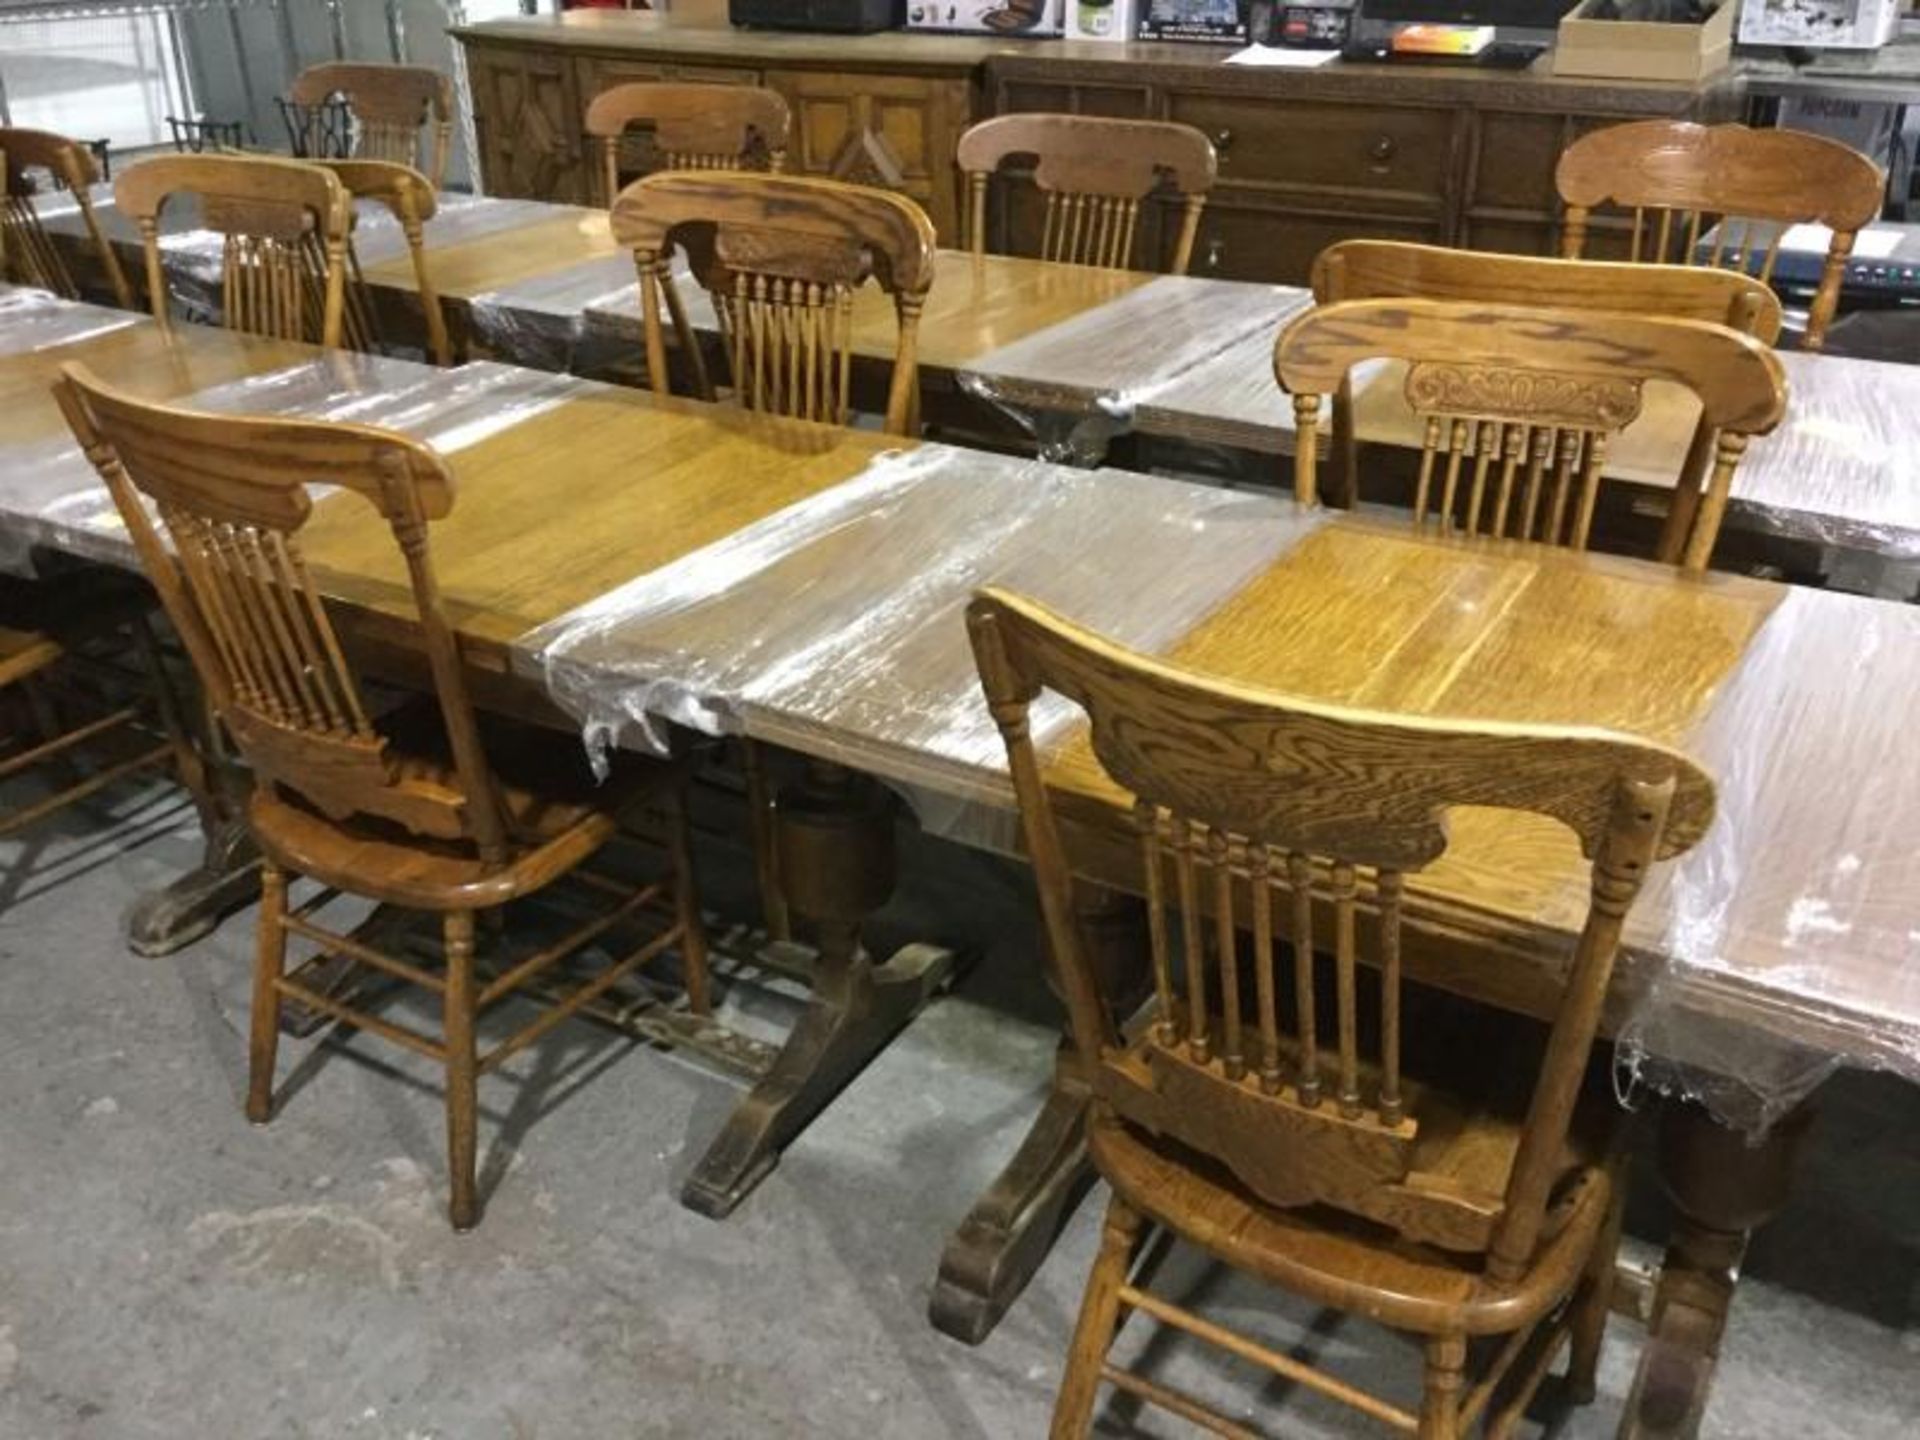 March 21, 2018. Auction - From a Piano to a Sink we have it all. Restaurant Equipment, Returns and M - Image 11 of 20